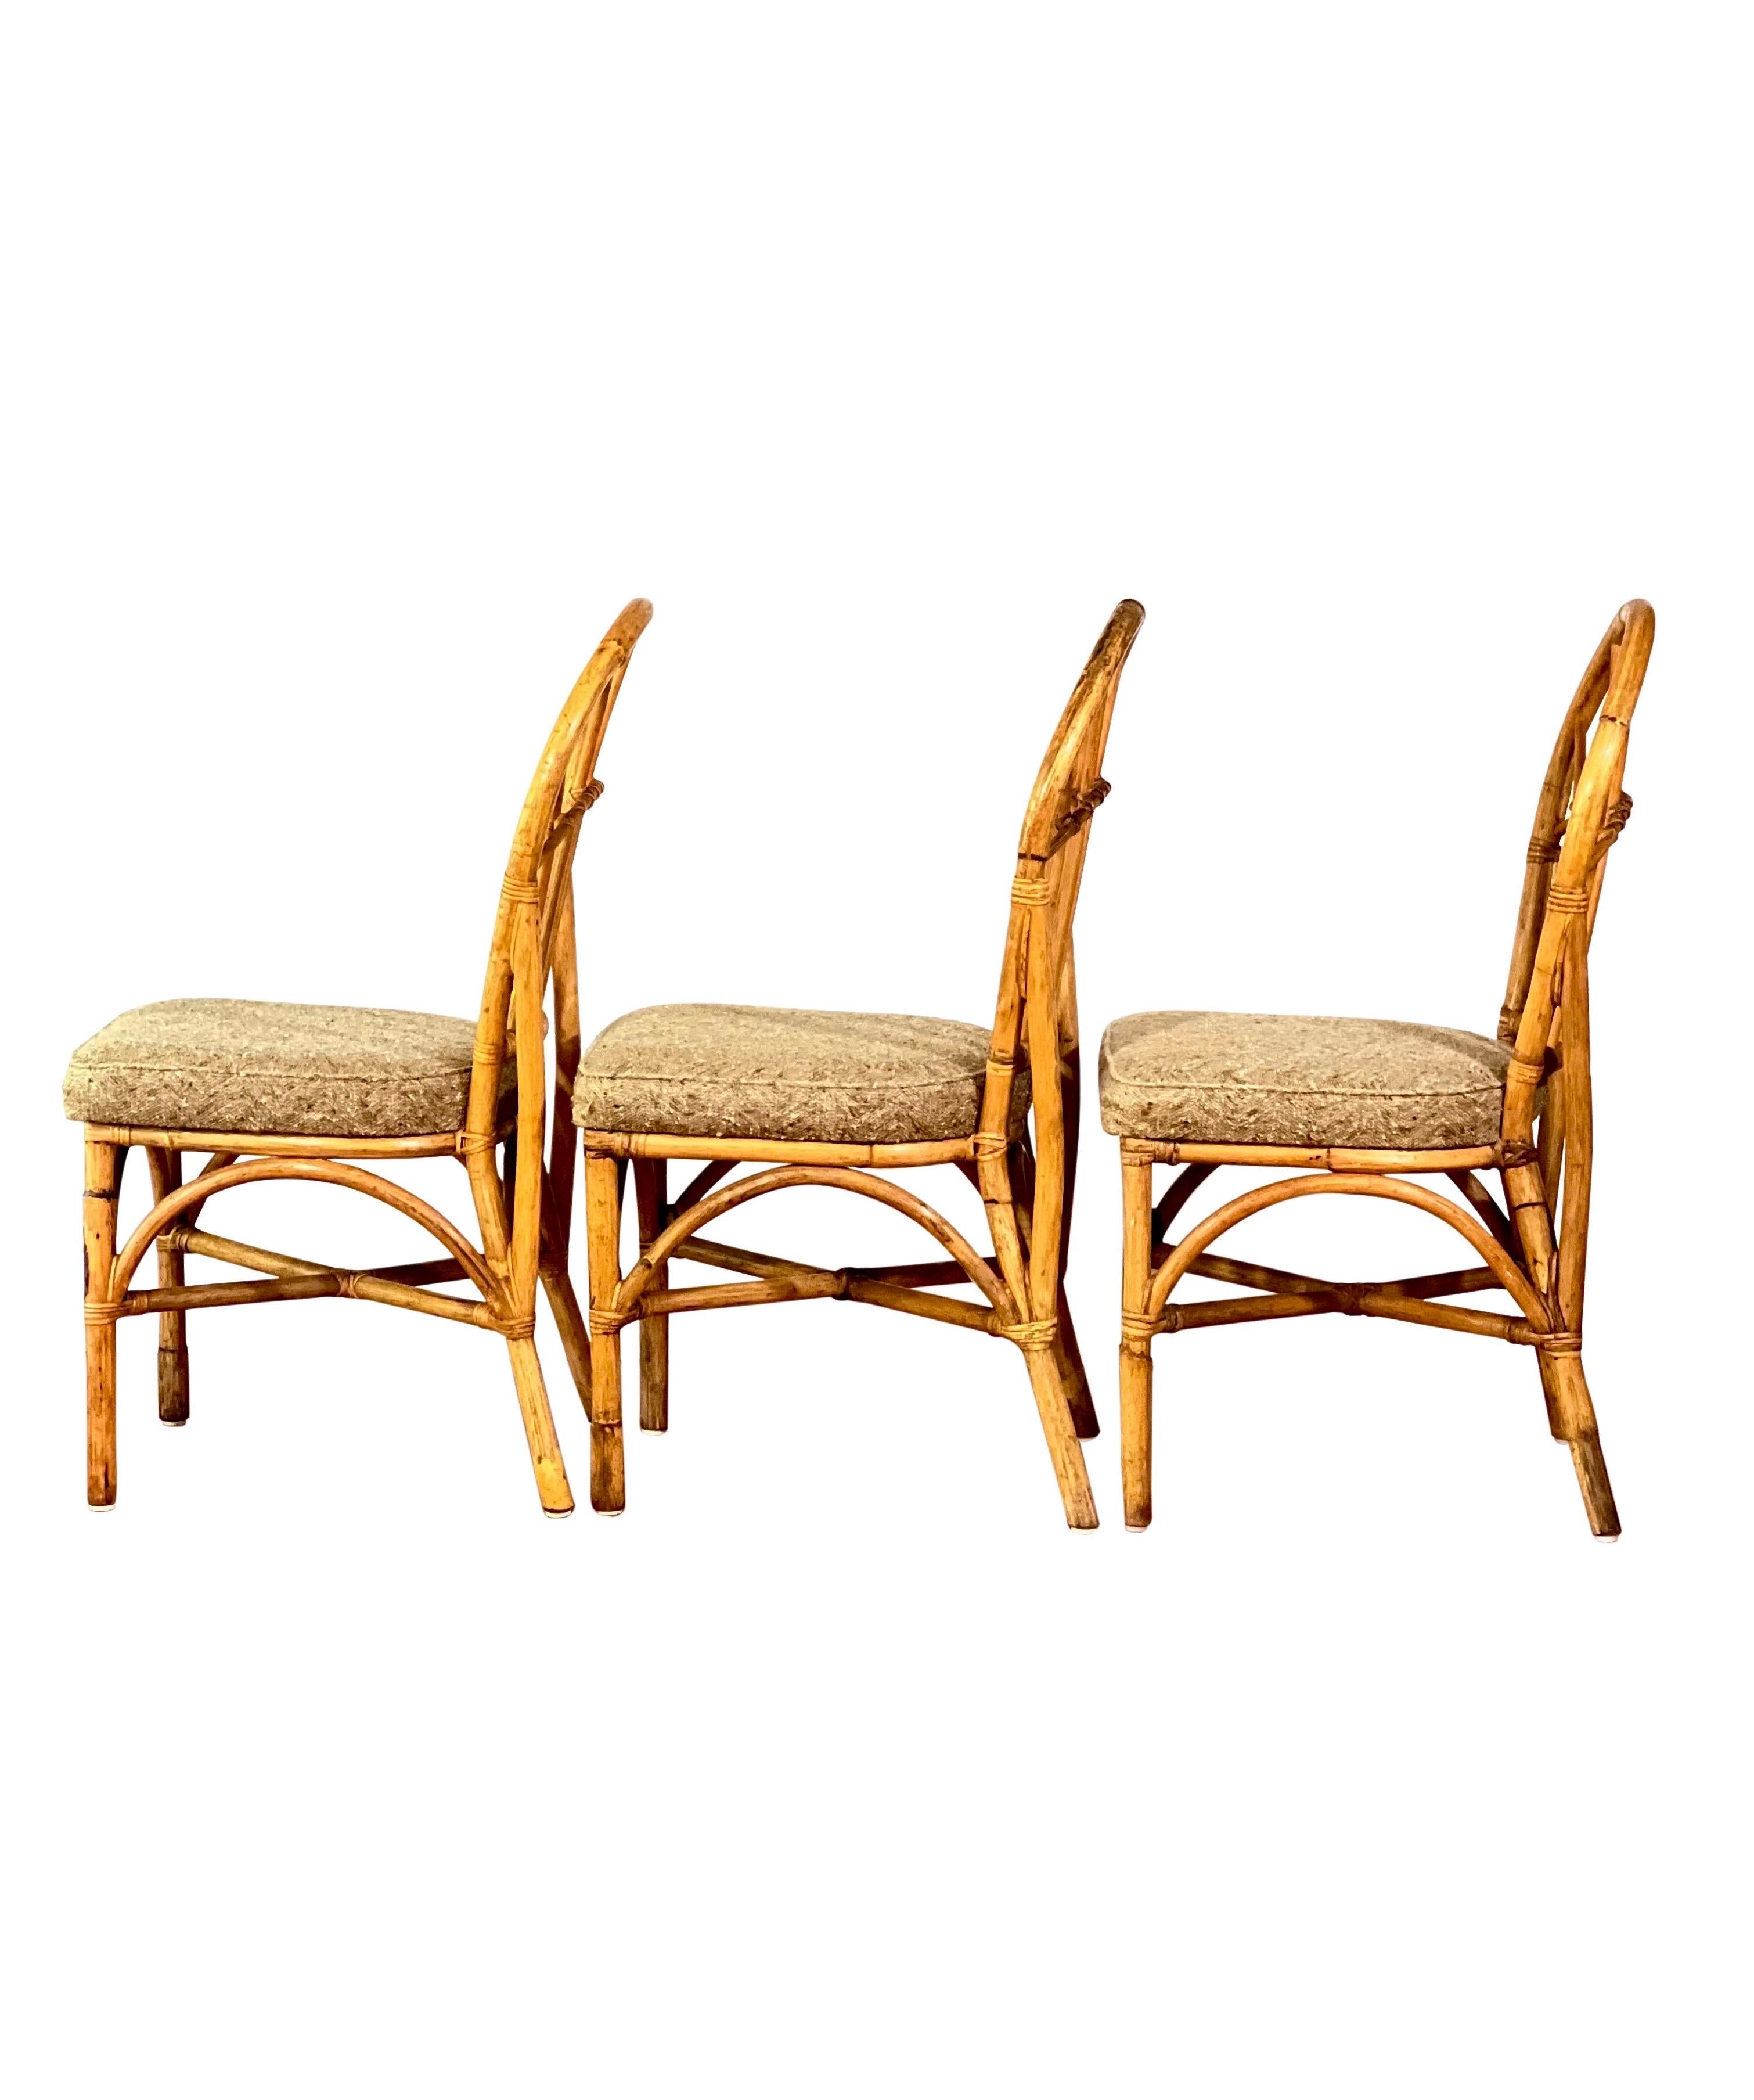 Bohemian Vintage Bamboo Upholstered Dining Chairs, Set of 4 For Sale